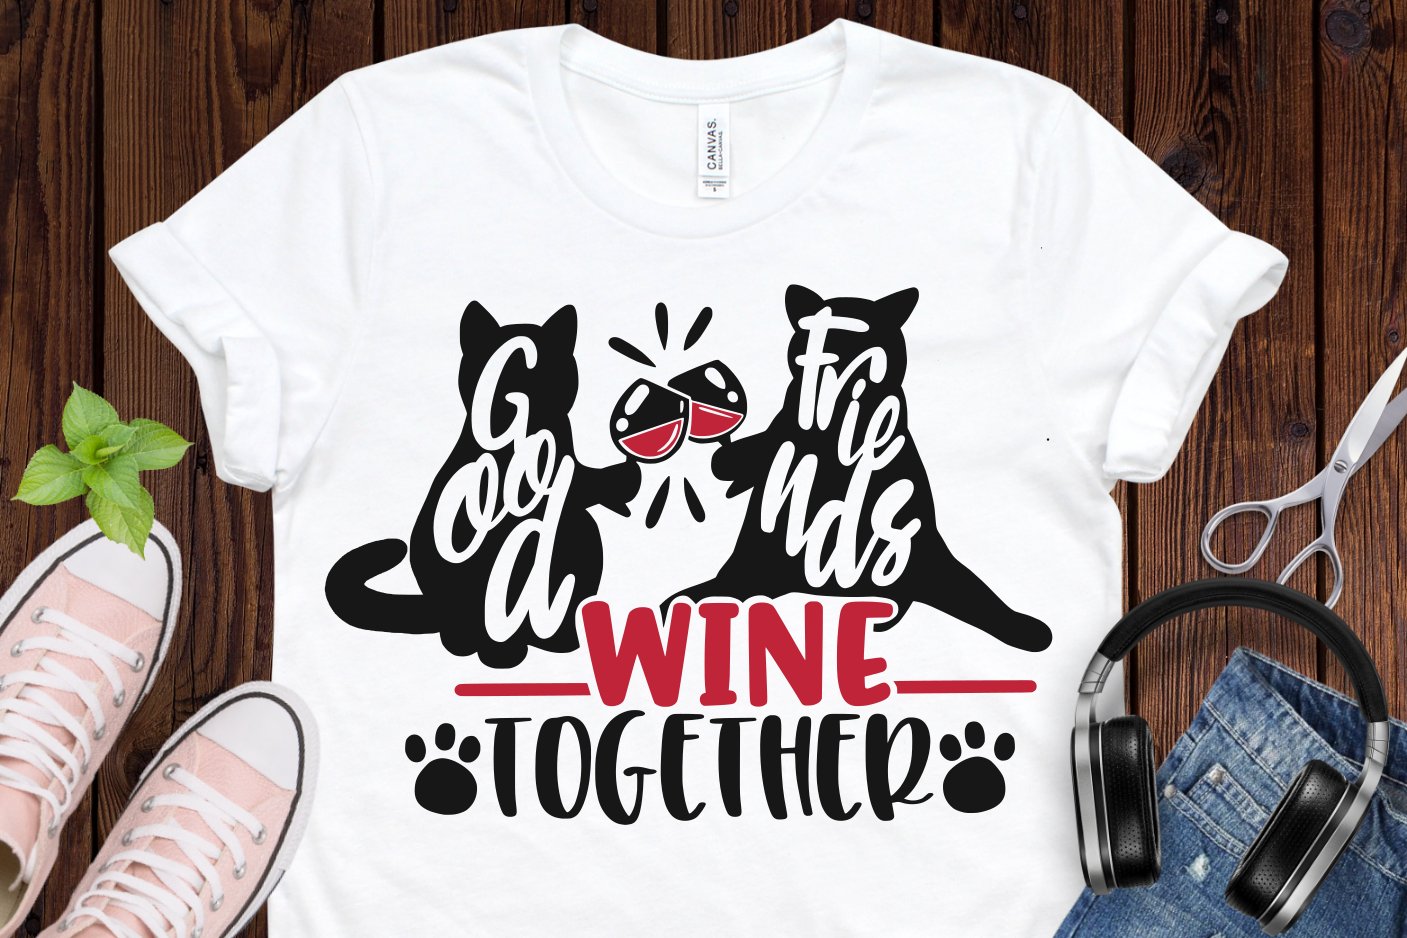 T-shirt with cats and wine.